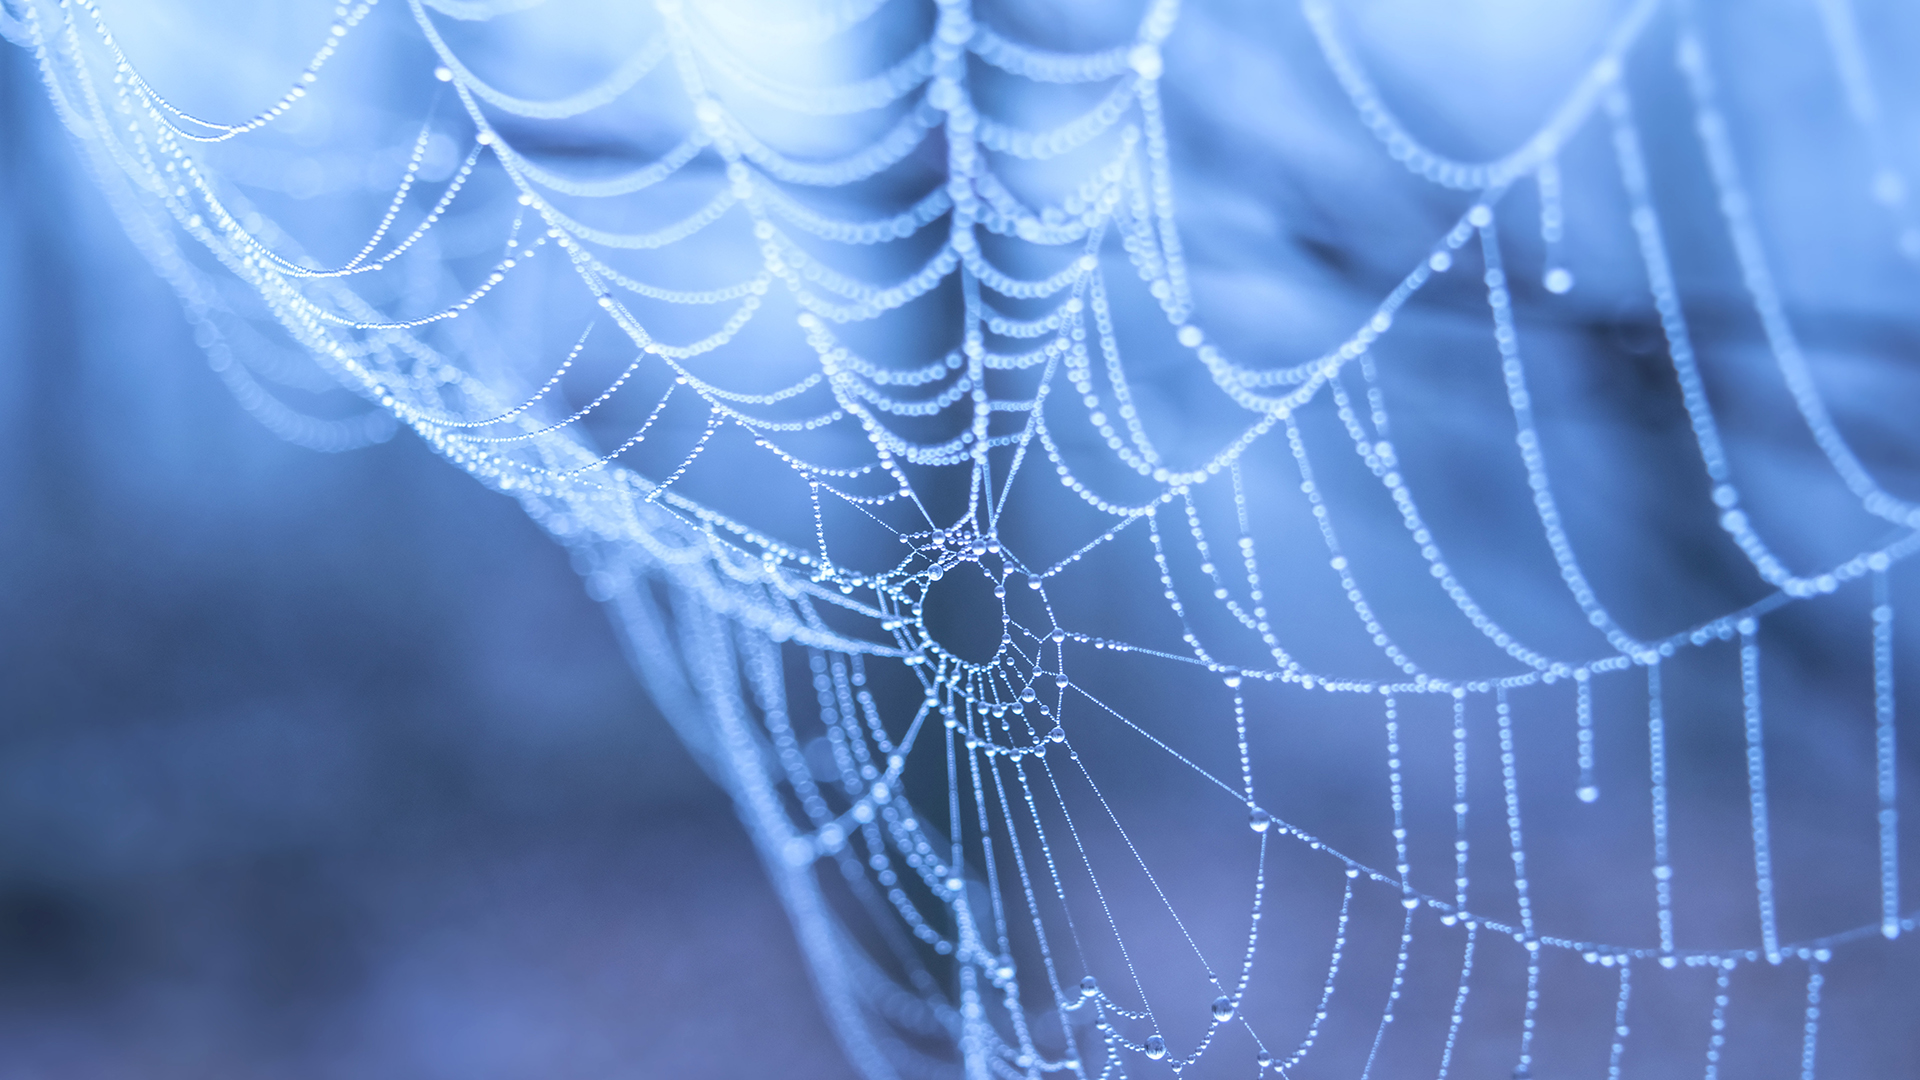 Spider web with water droplets on a blue background | Windows 10 Spotlight  Images